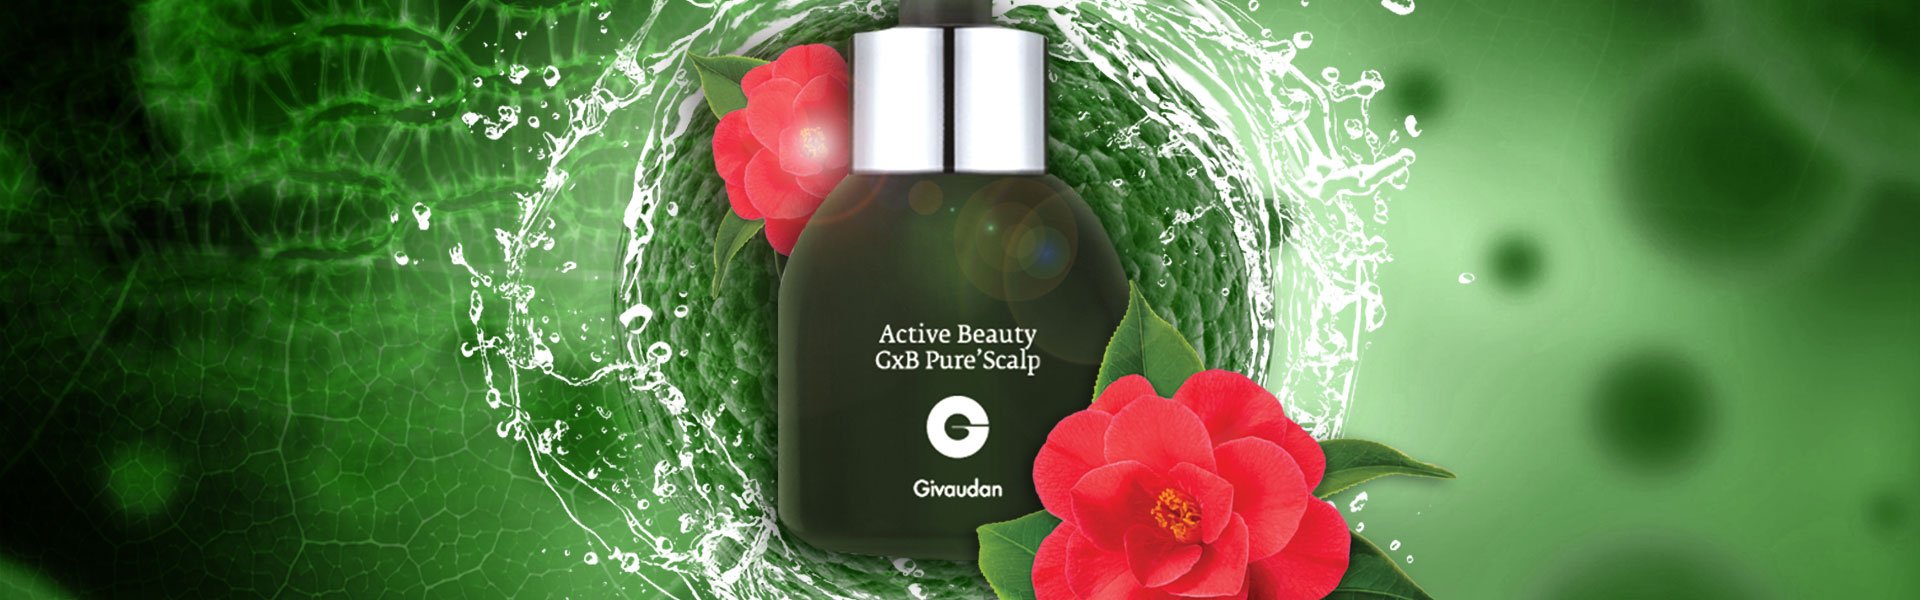 GxB Pure’Scalp: The holistic remedy for dry scalp